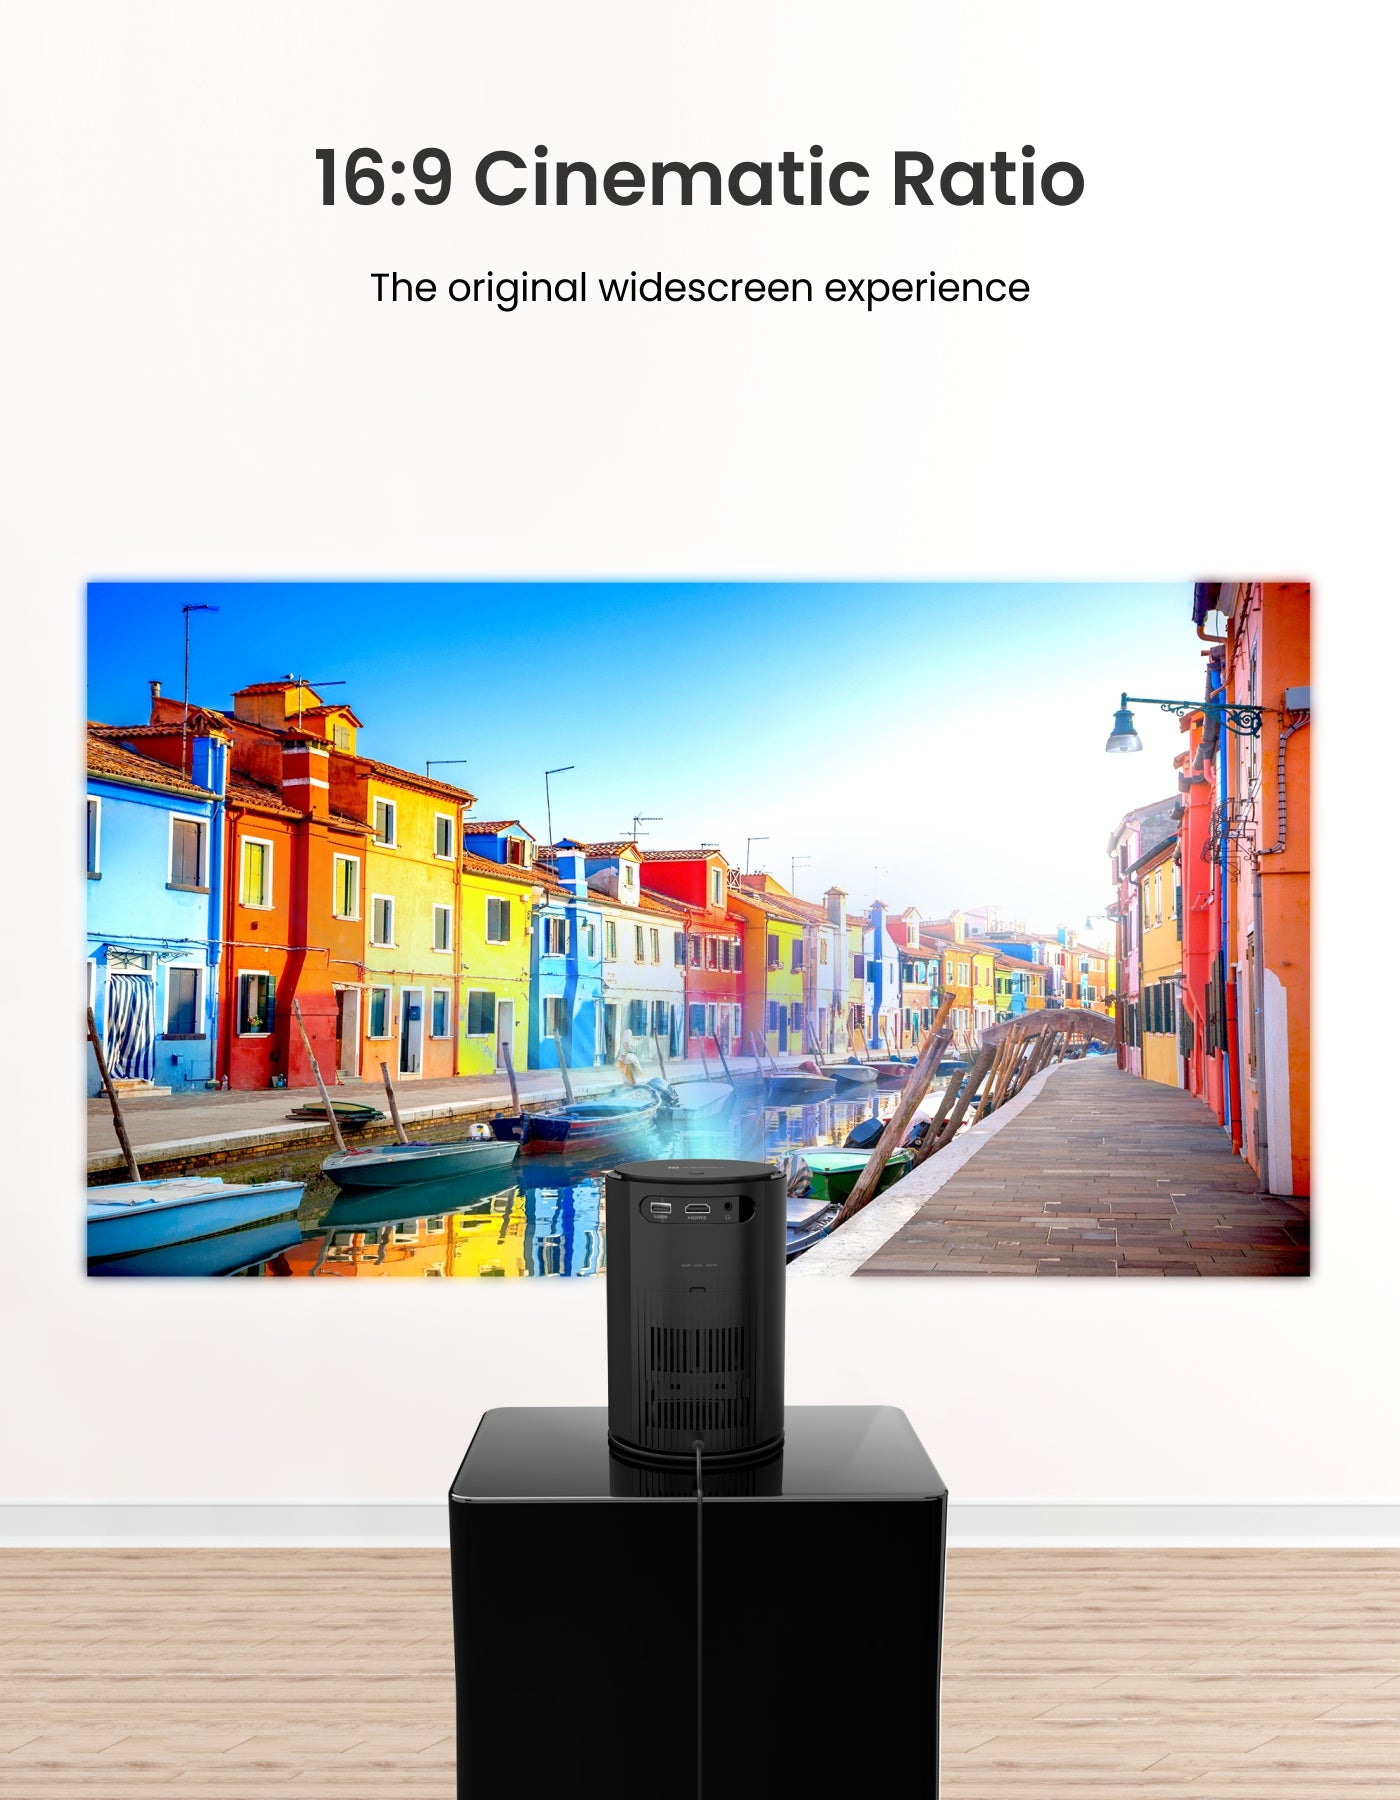 Portronics Beem 410 smart mini android led projector| Portable projector for home with sharp display 250 ANSI Lumens and HD Resolution